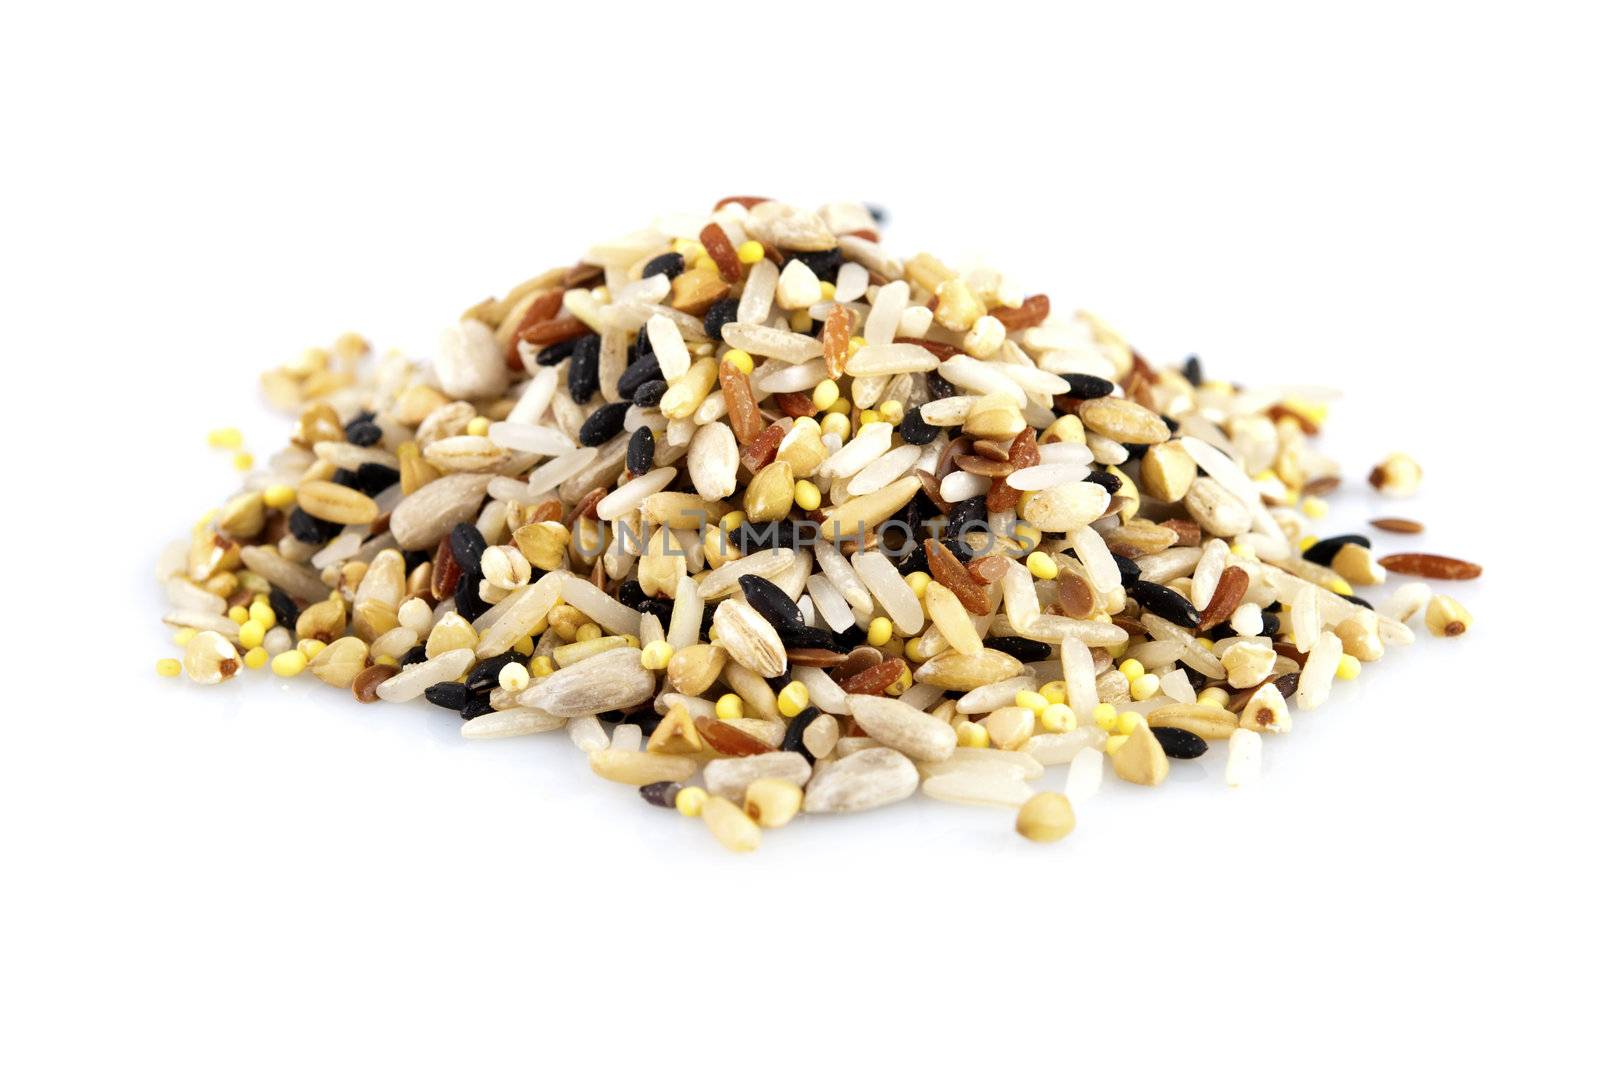 Raw grains, mixed with 12 different grains